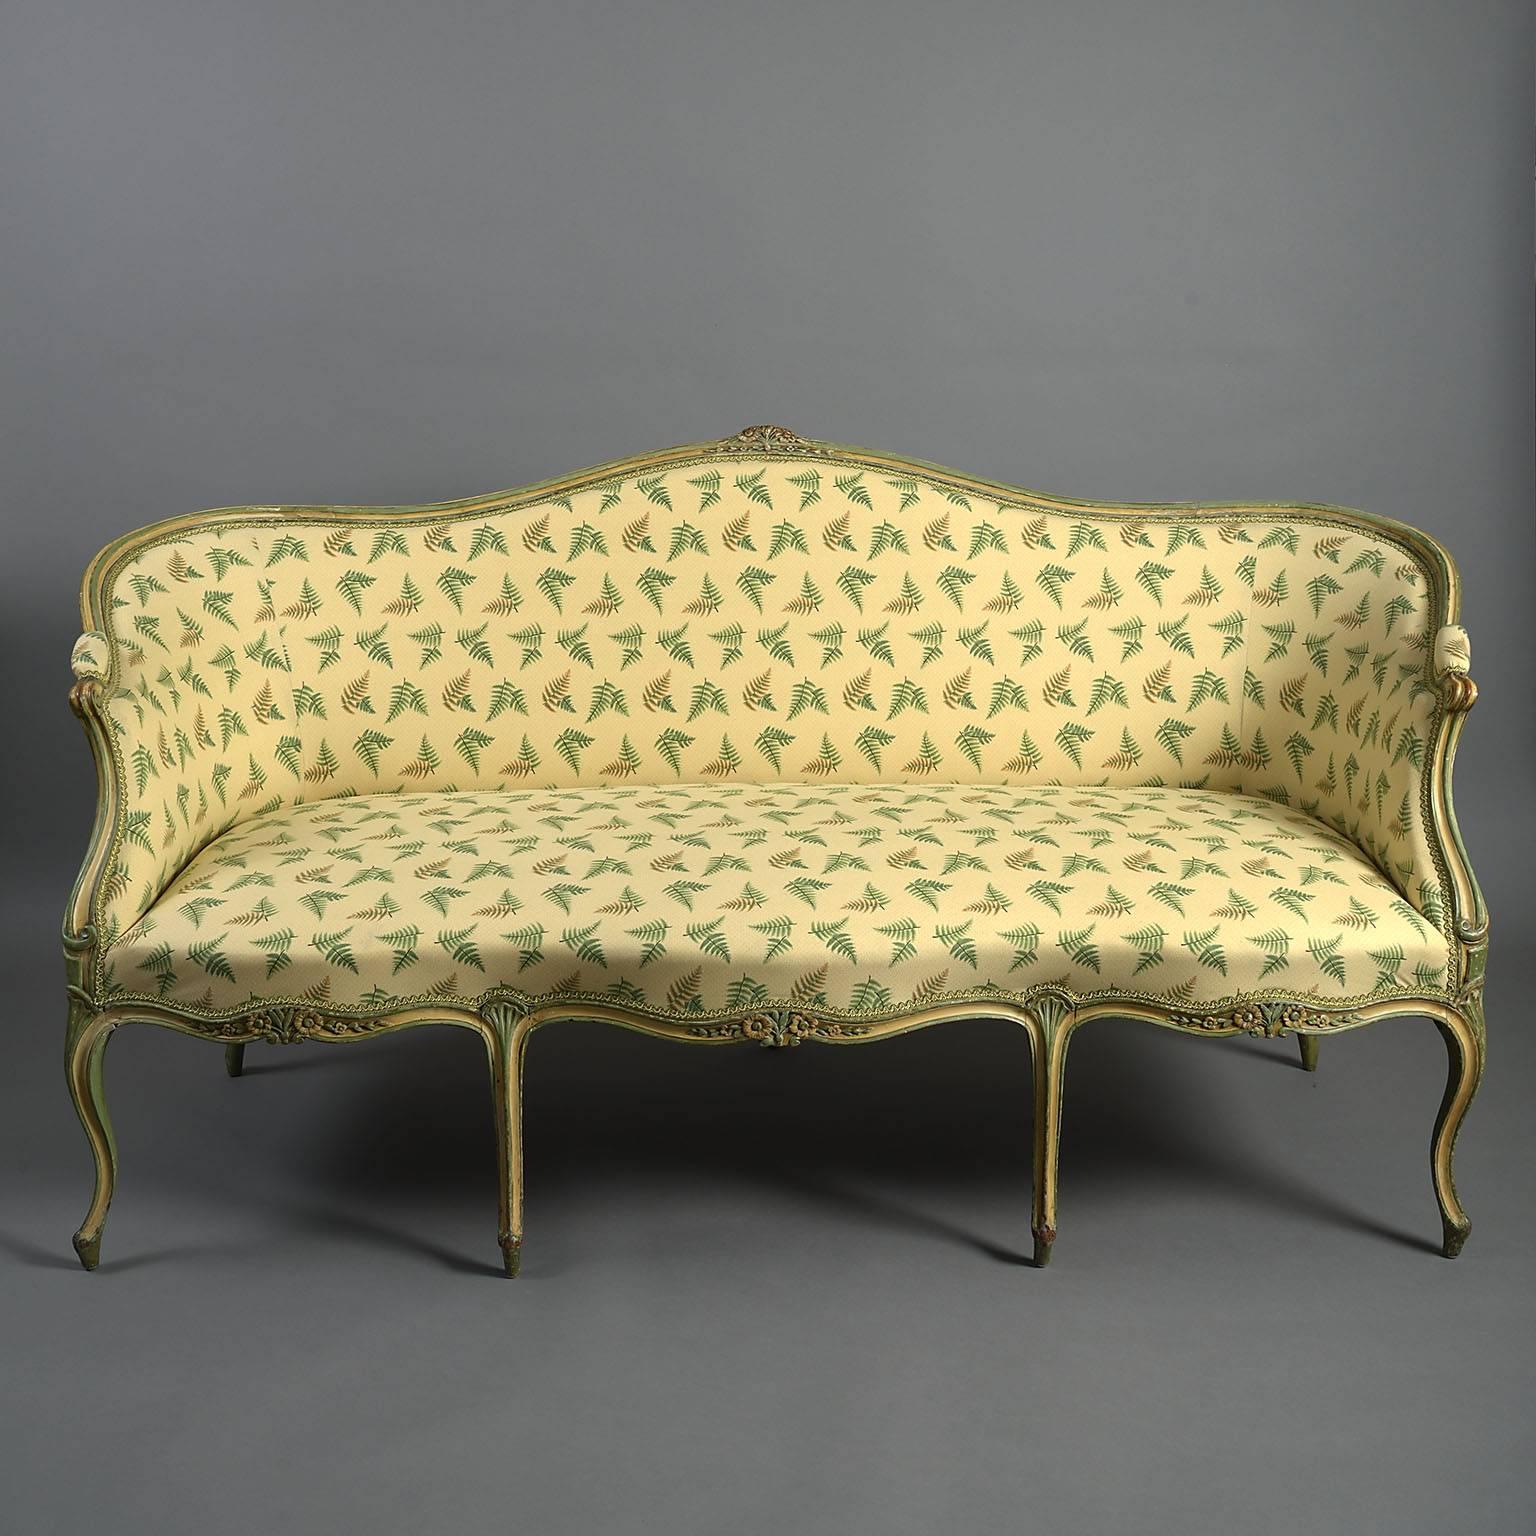 18th century English George III painted sofa.
In the French taste, the moulded beechwood frame carved with flowers to the cresting and seat rails. The serpentine form raised on cabriole legs all painted in palest yellow picked out in green. The